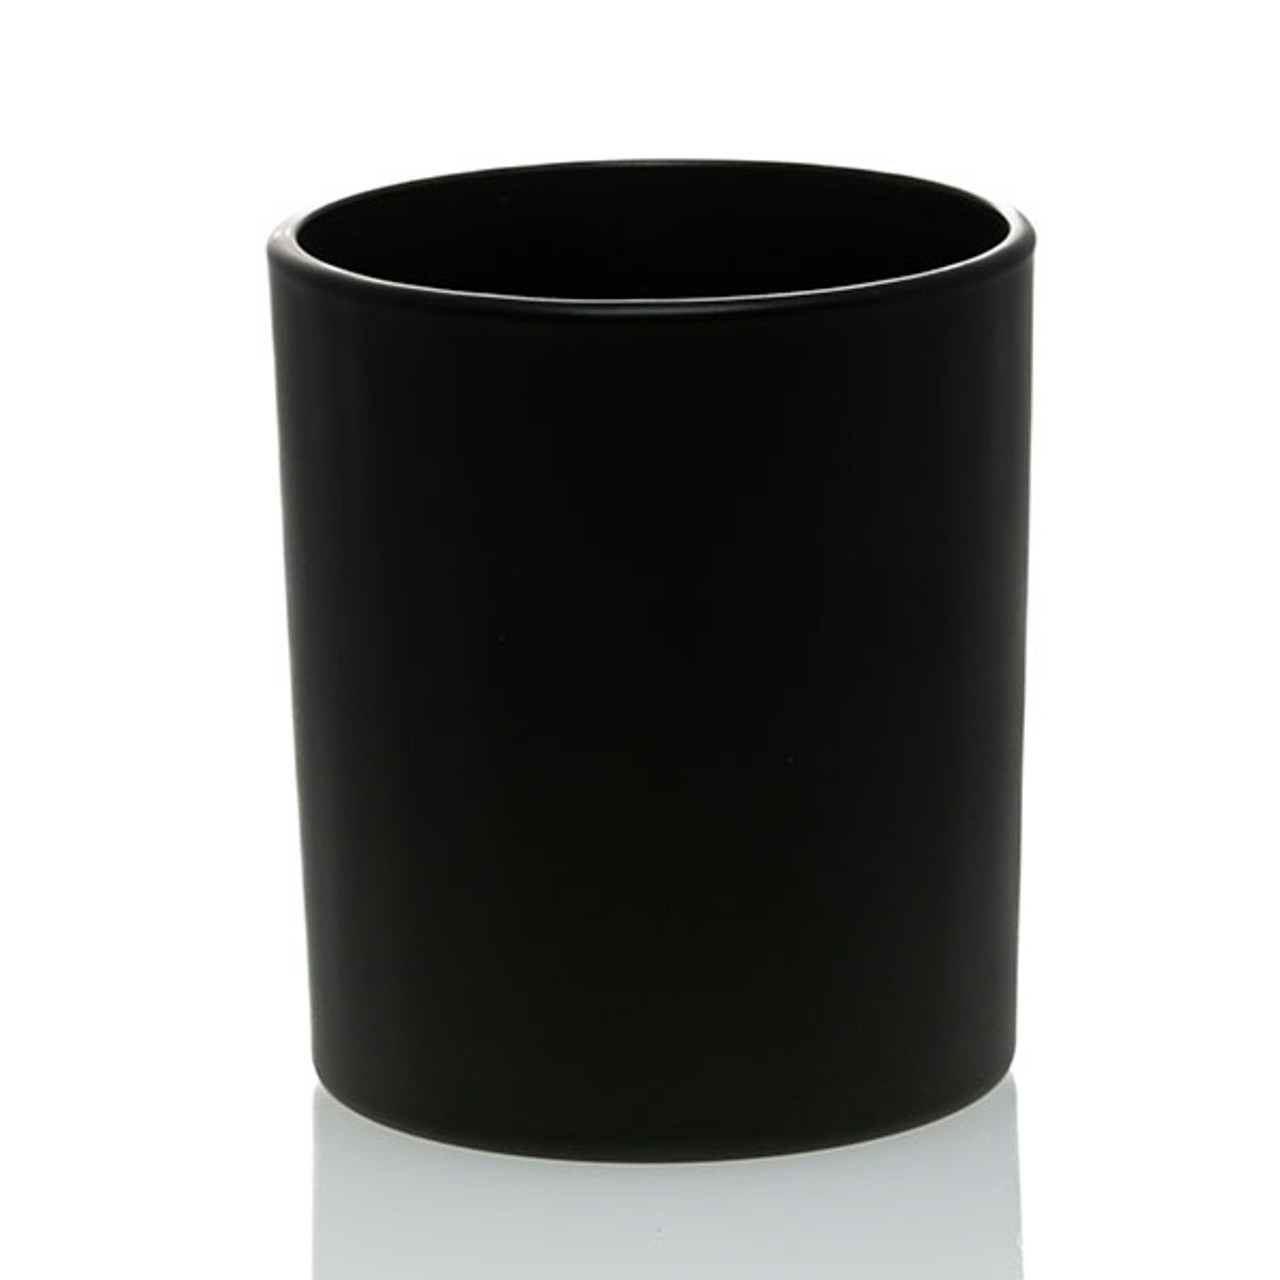 7.75 Oz. Black Candle Jar Optional With Bamboo Lid Cork Lid Candle  Container Candle Jar Black Lid Decor Storage With Lid 